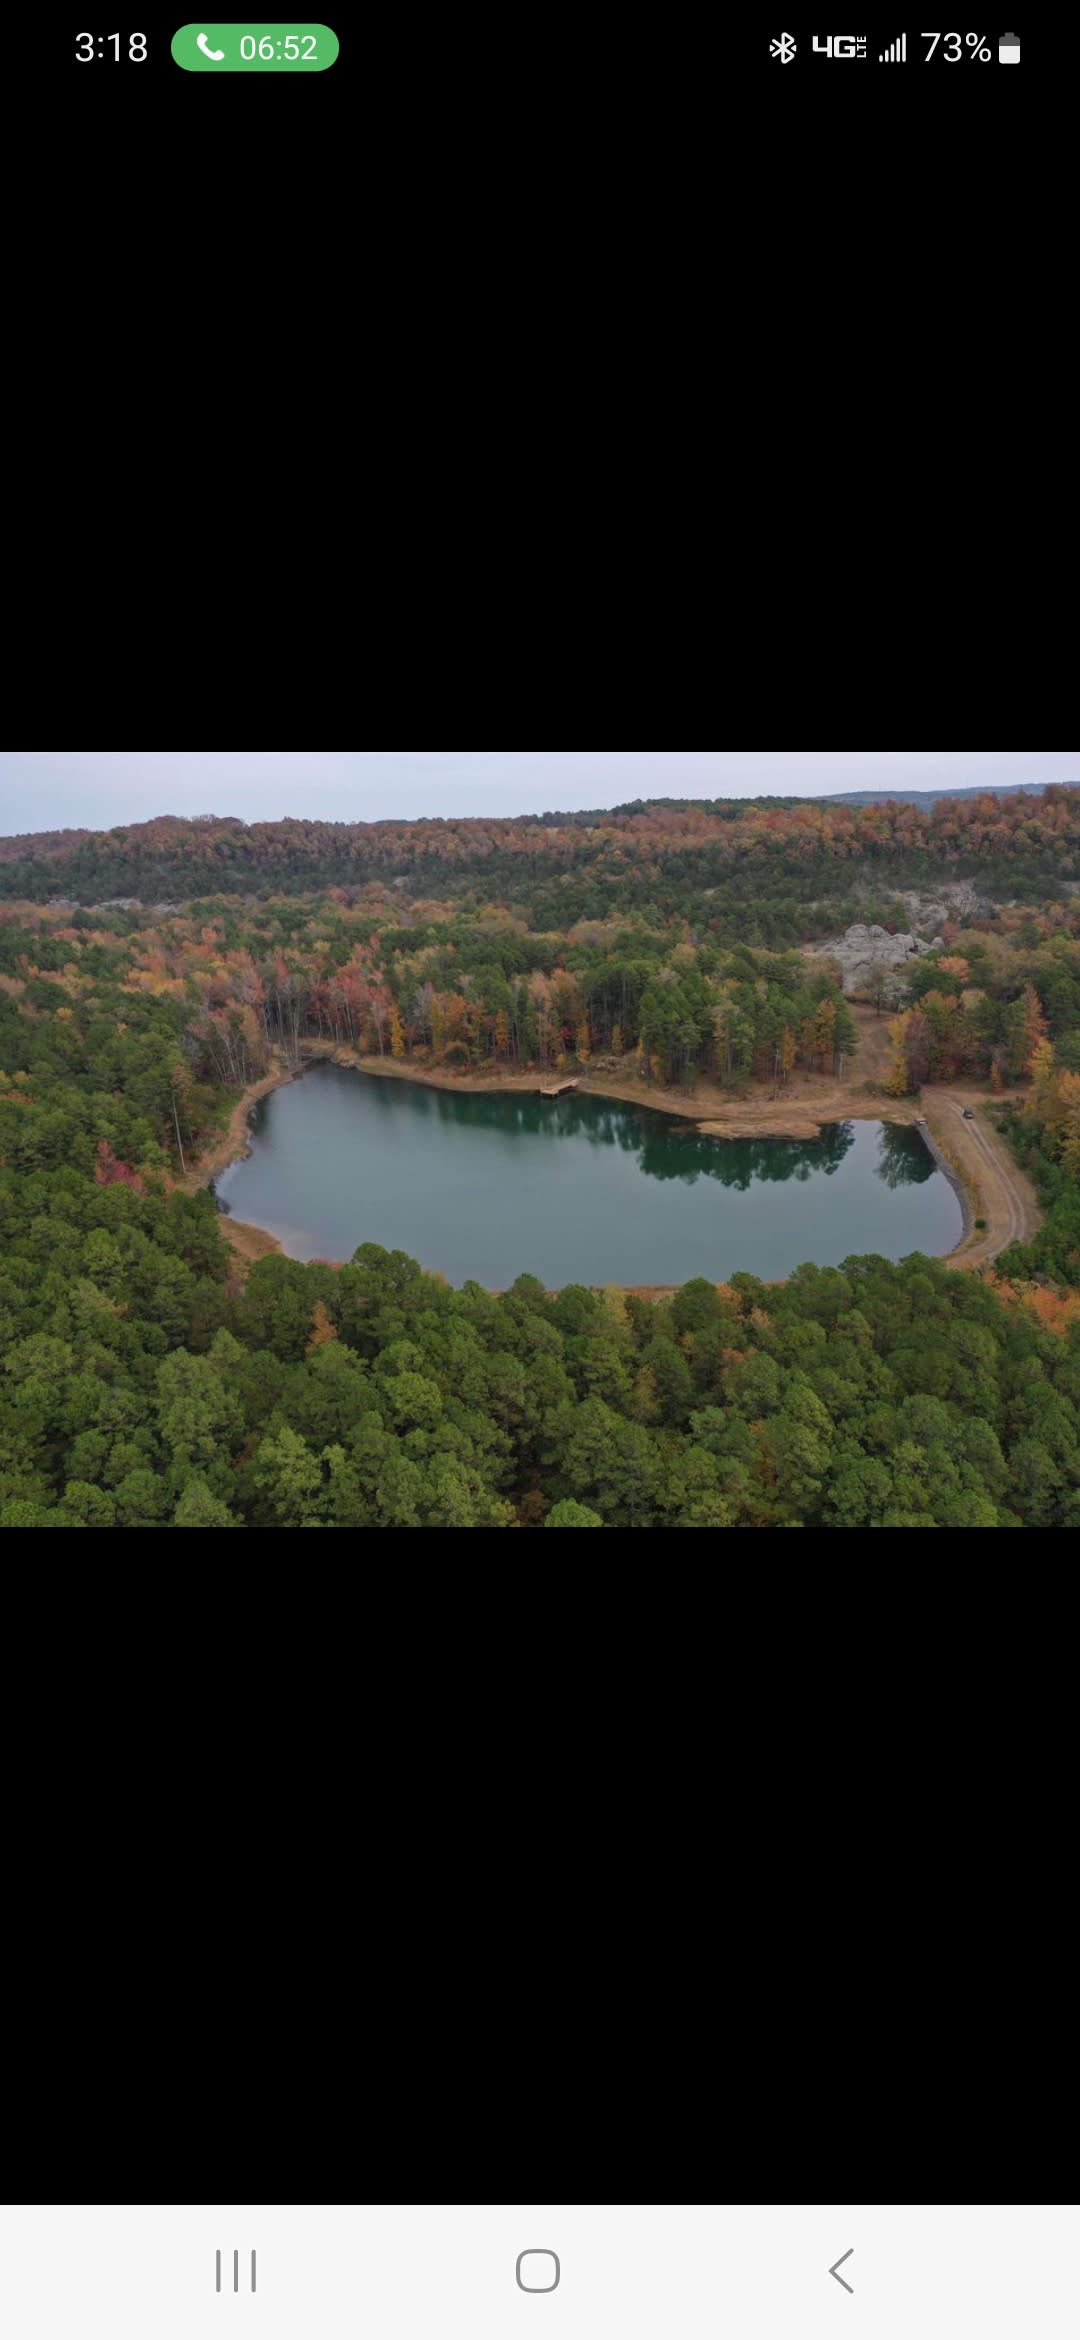 This is one of the 5 acre lakes on the lower property of Dreamland1440.